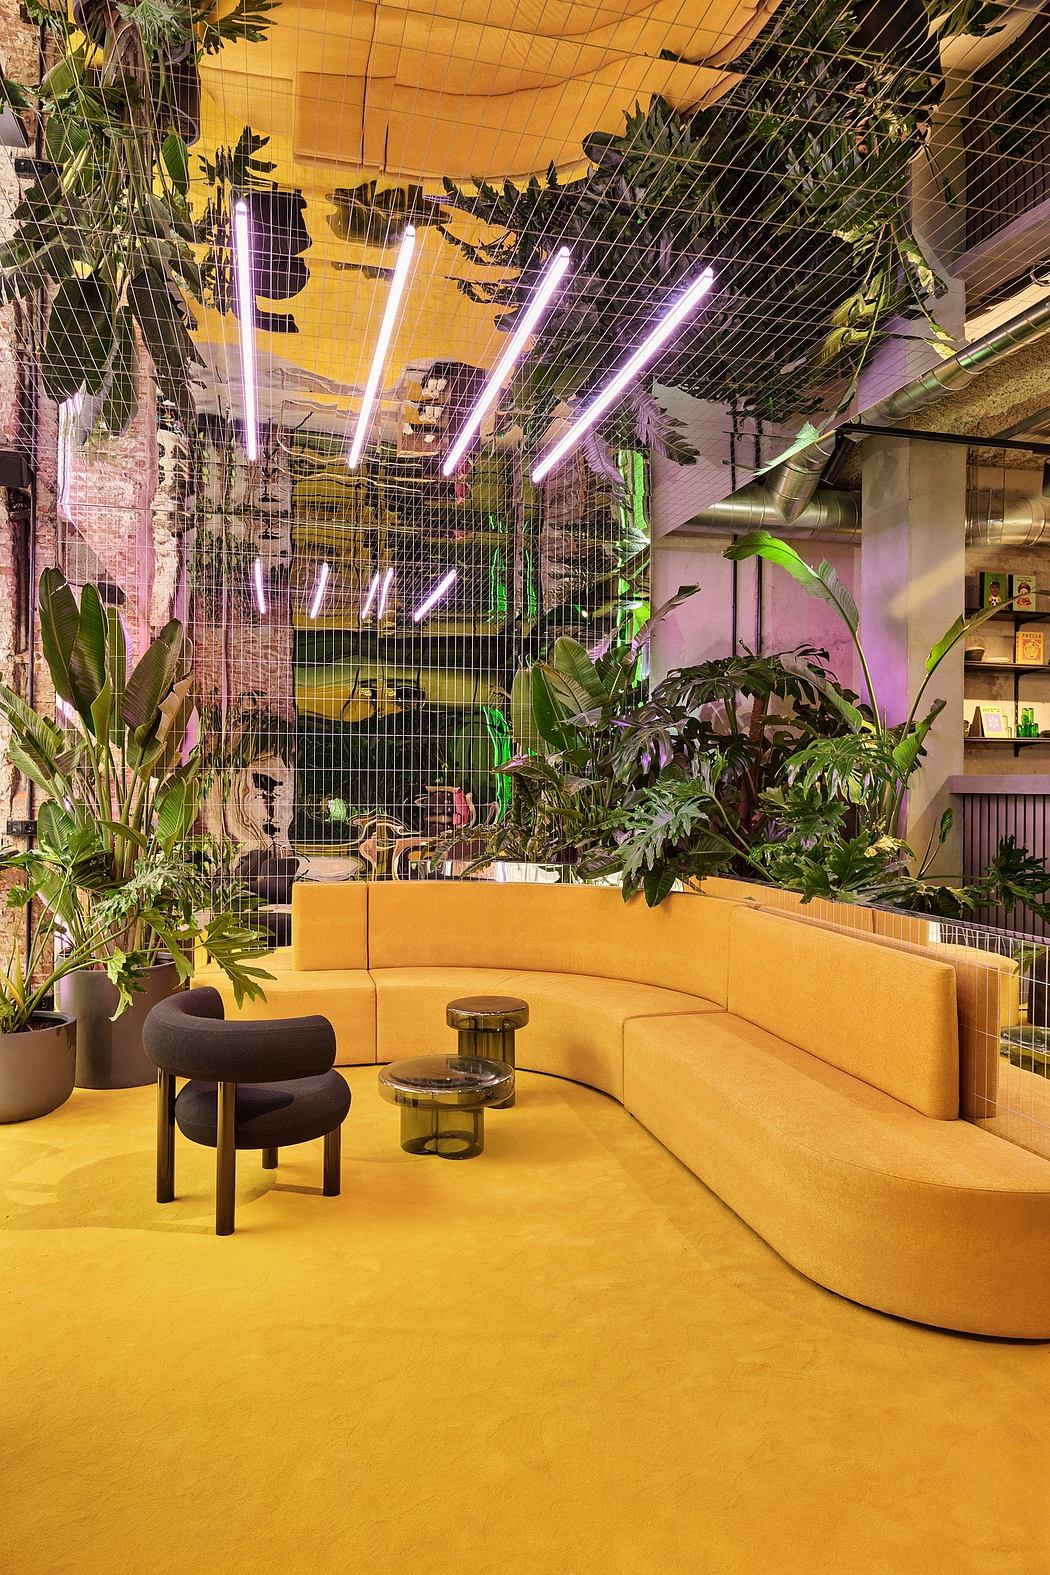 Vibrant, lush interior with neon lighting, tropical plants, and curved yellow seating.